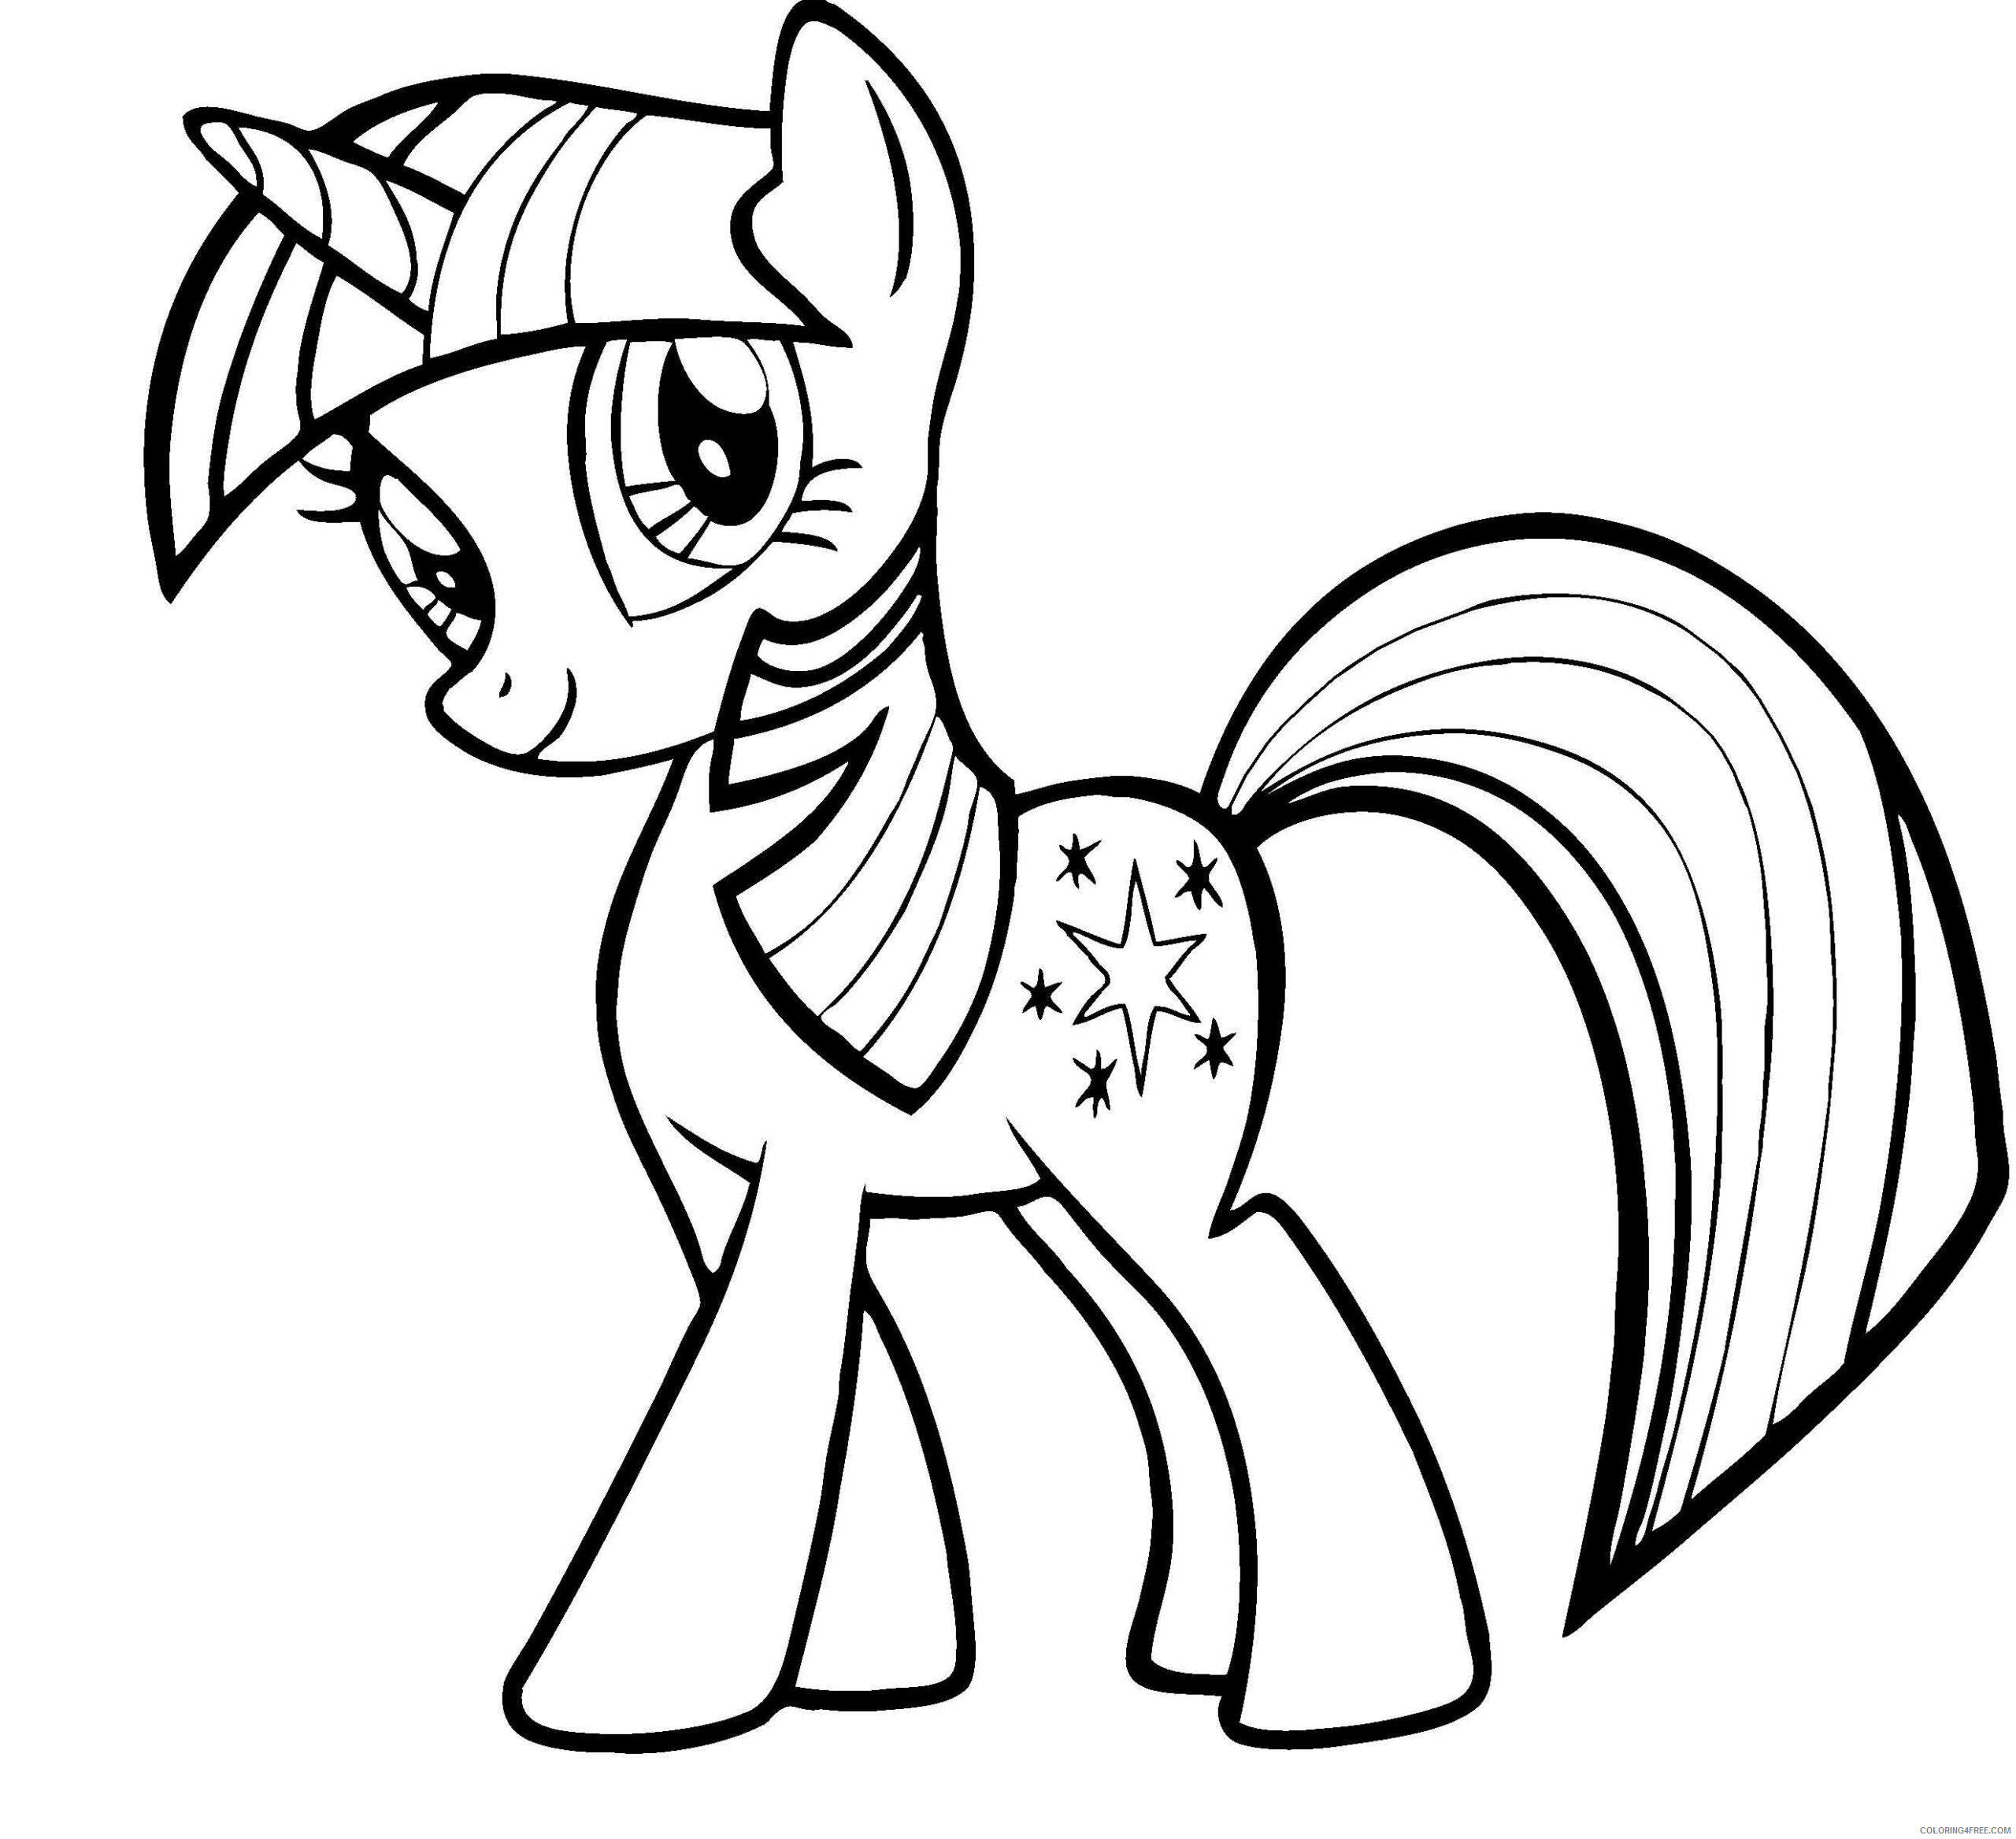 My Little Pony Coloring Pages Cartoons My Little Pony to Print Free Printable 2020 4519 Coloring4free